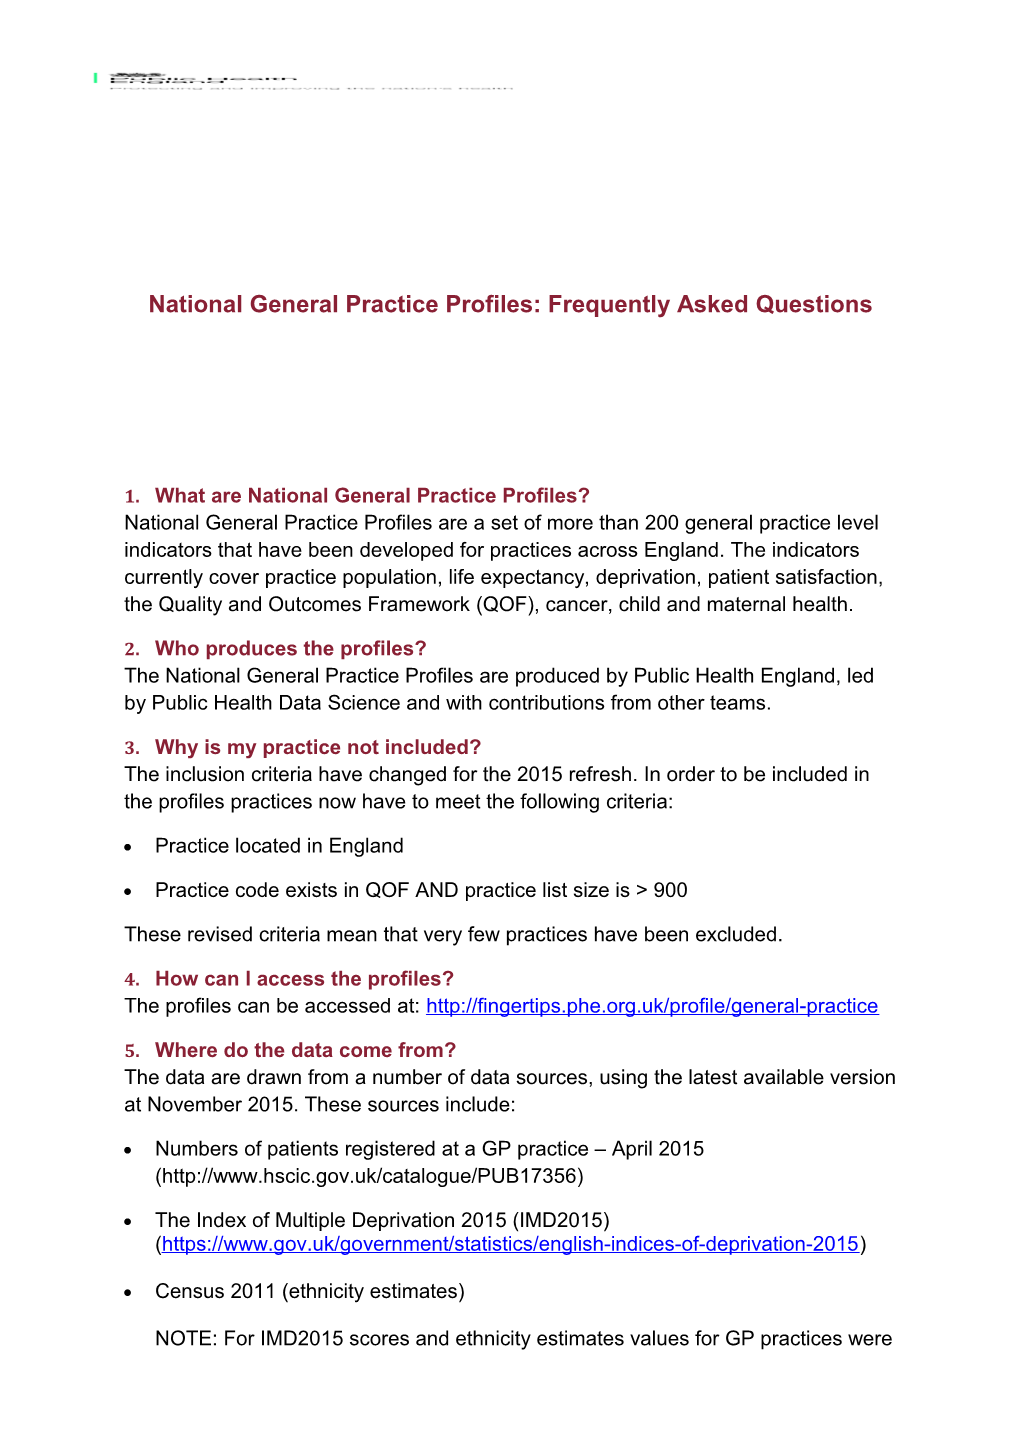 National General Practice Profiles: Frequently Asked Questions